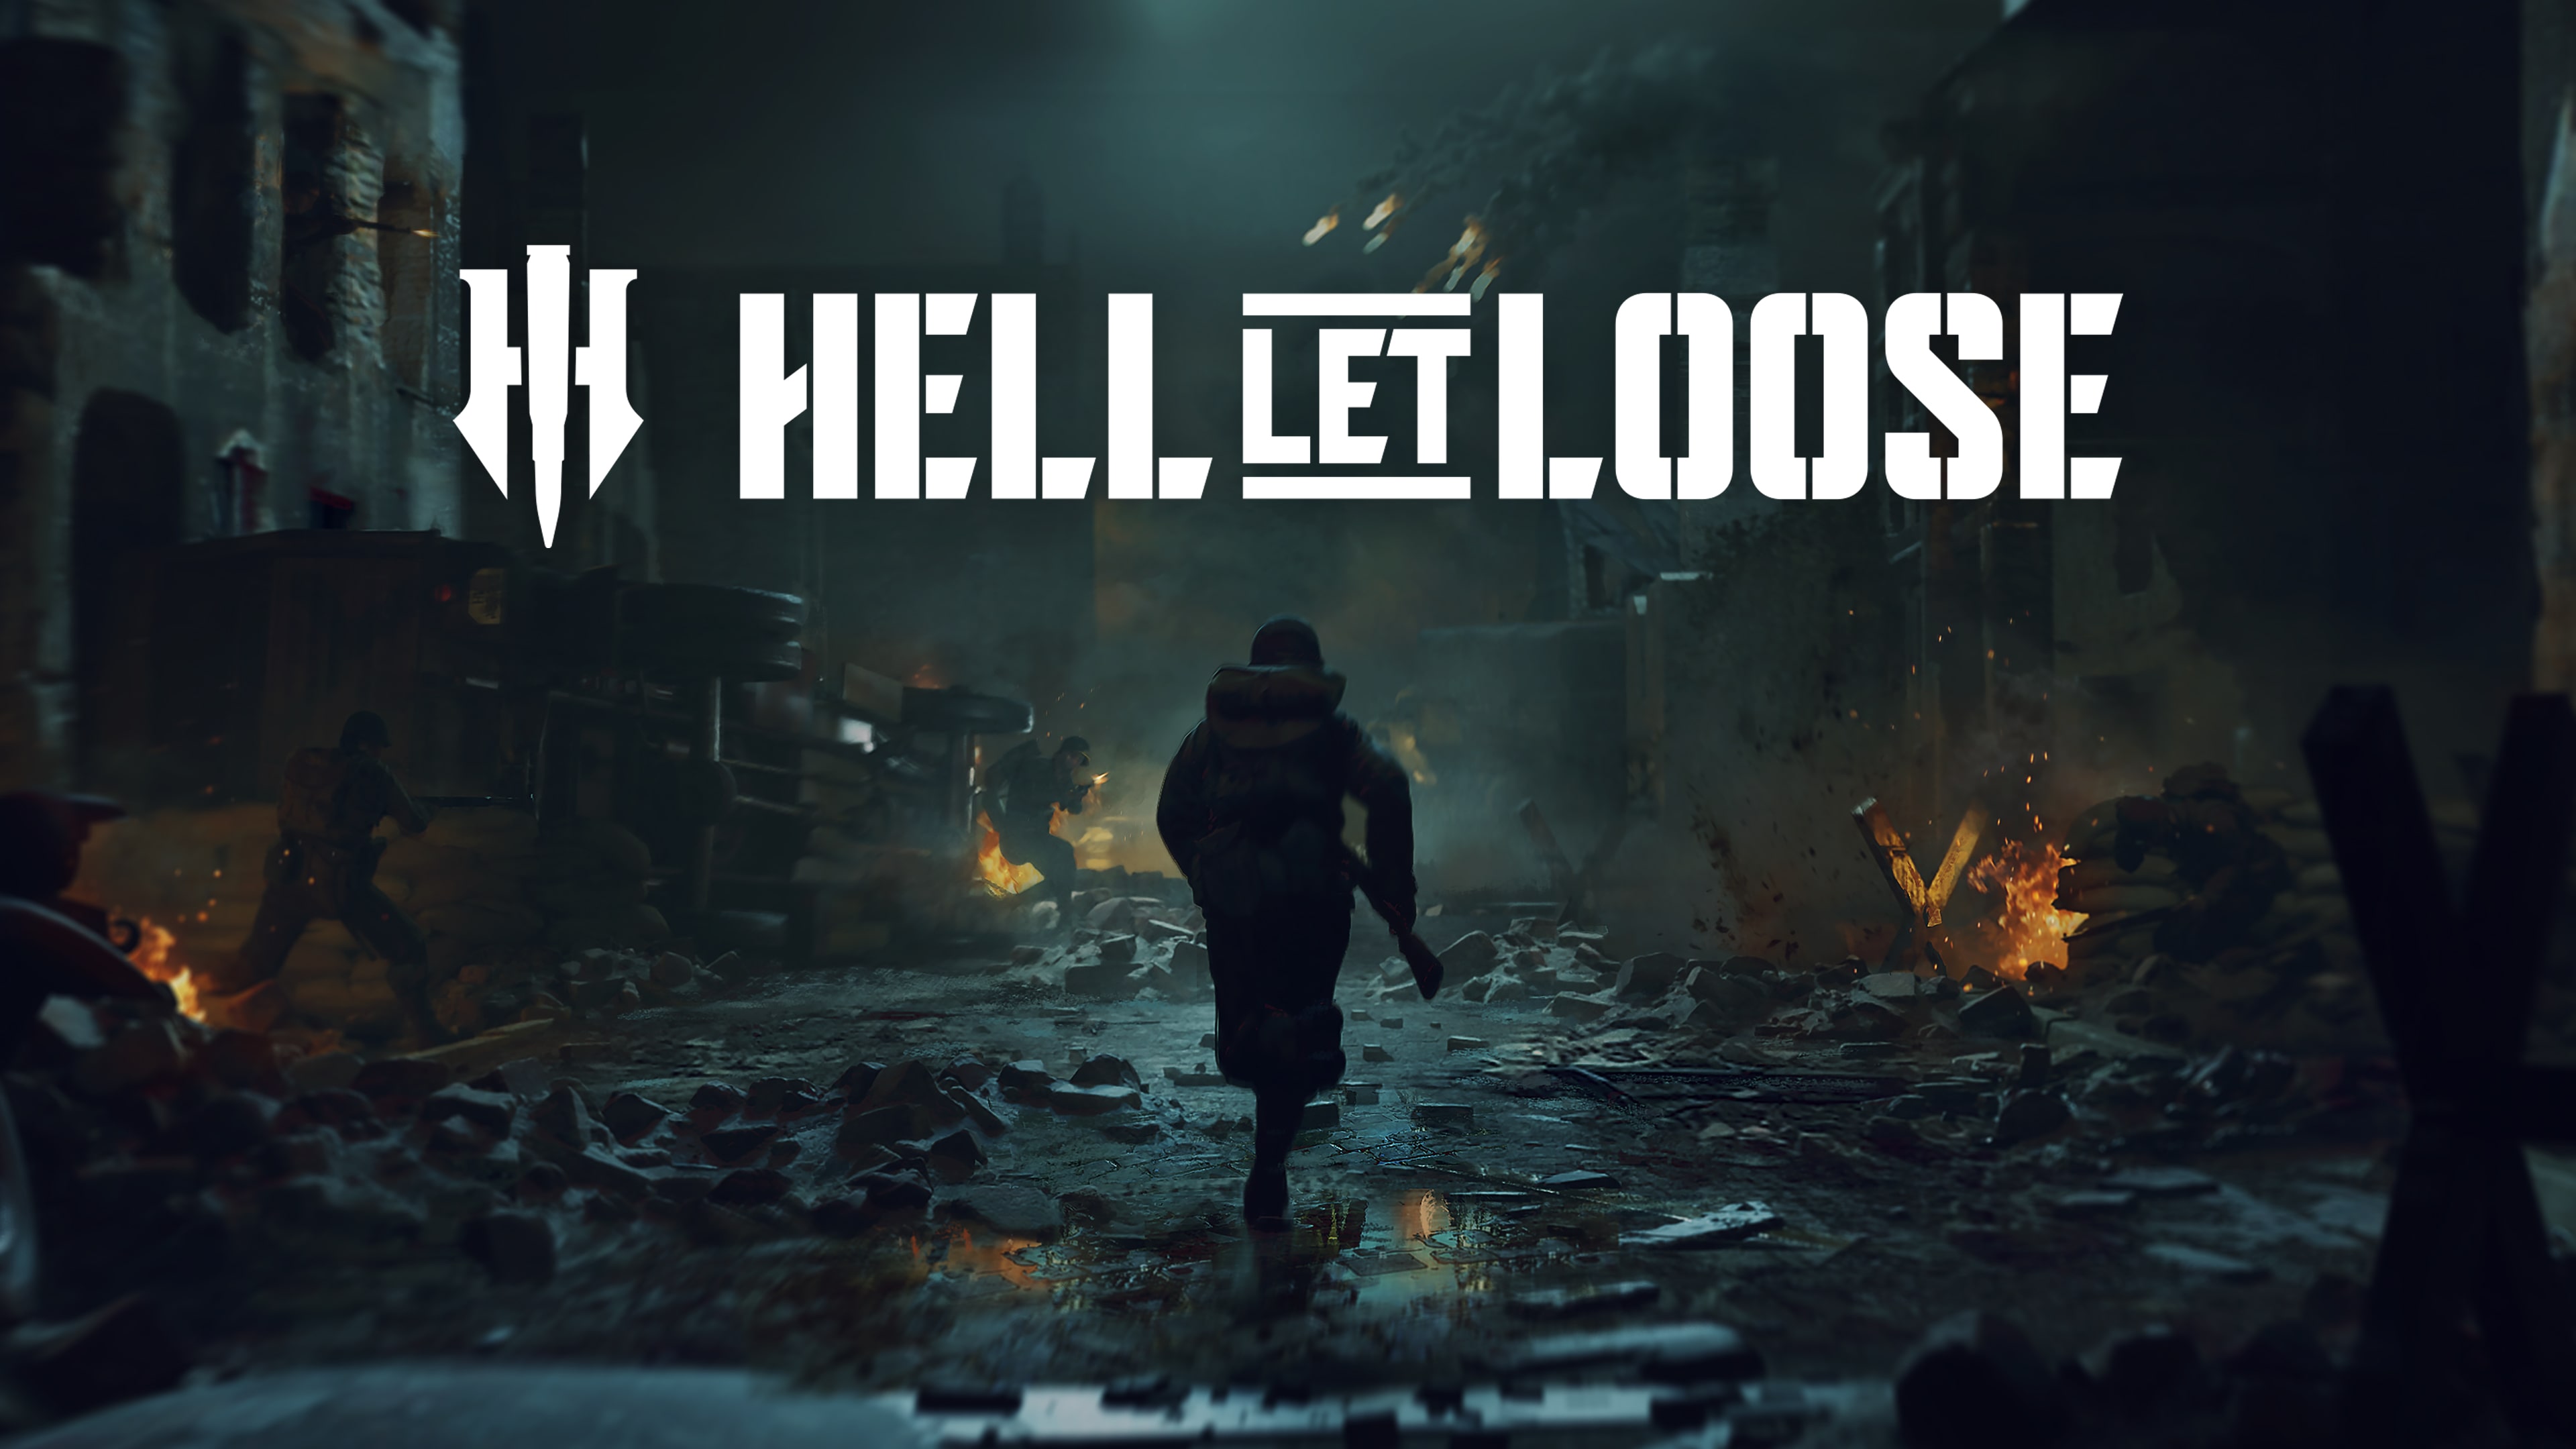 Hell Let Loose (Simplified Chinese, English, Korean, Japanese, Traditional Chinese)